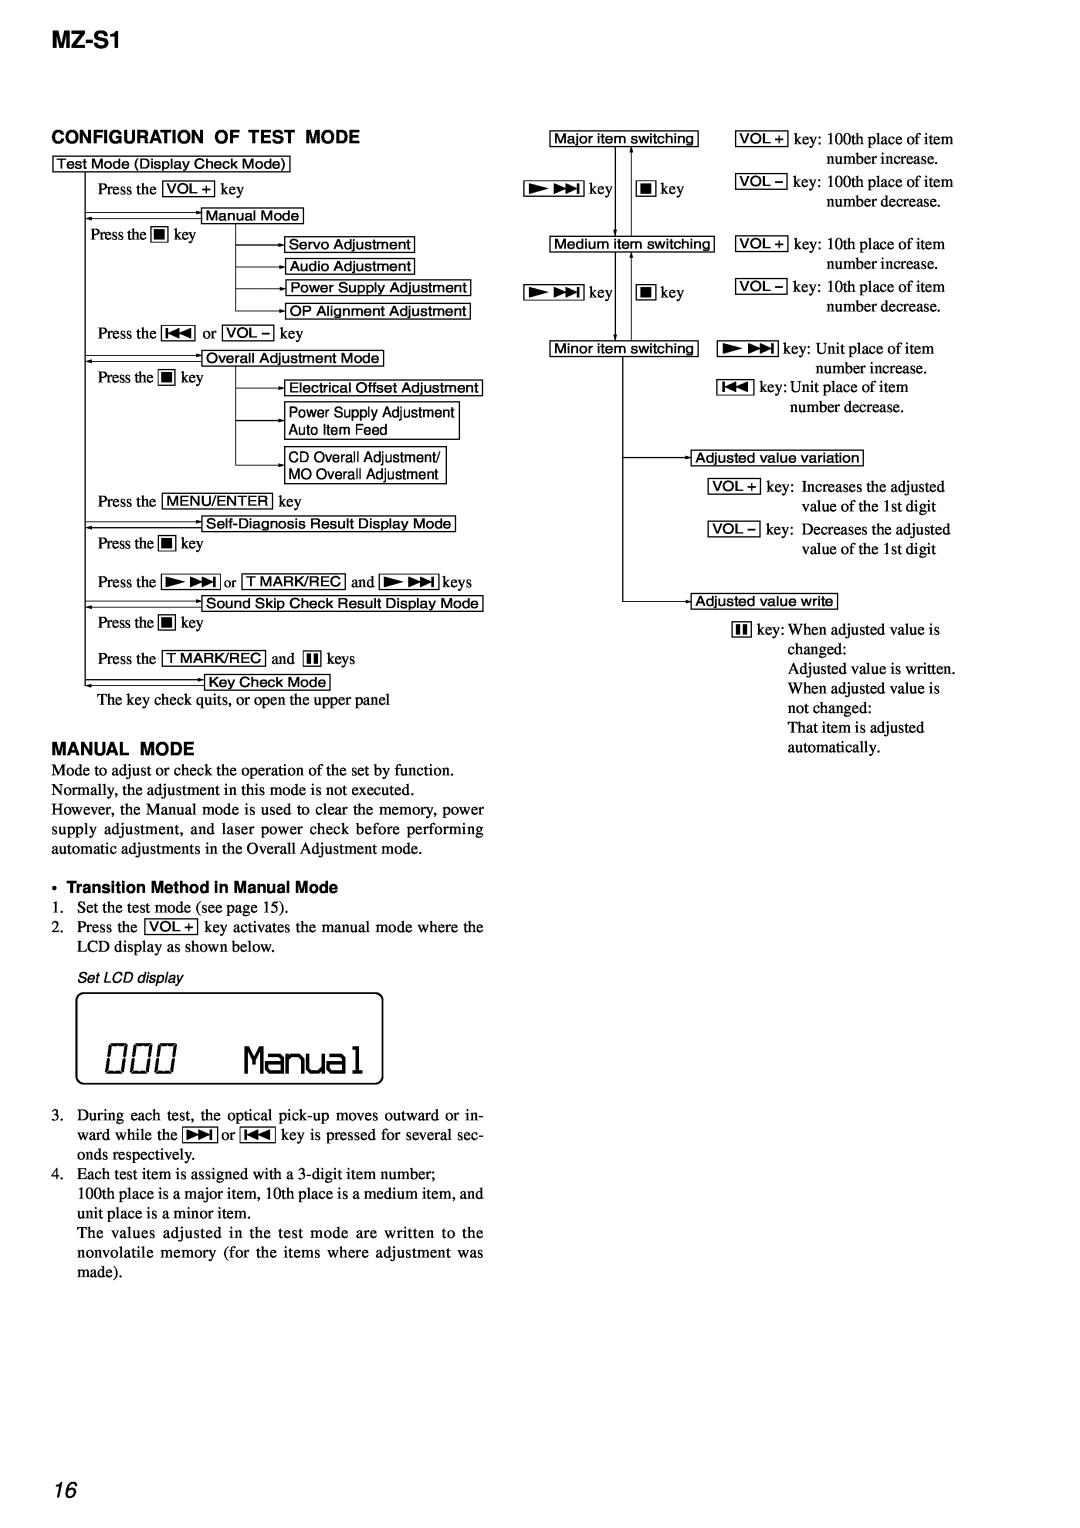 Sony MZ-S1 service manual 000Manual, Configuration Of Test Mode, Manual Mode 